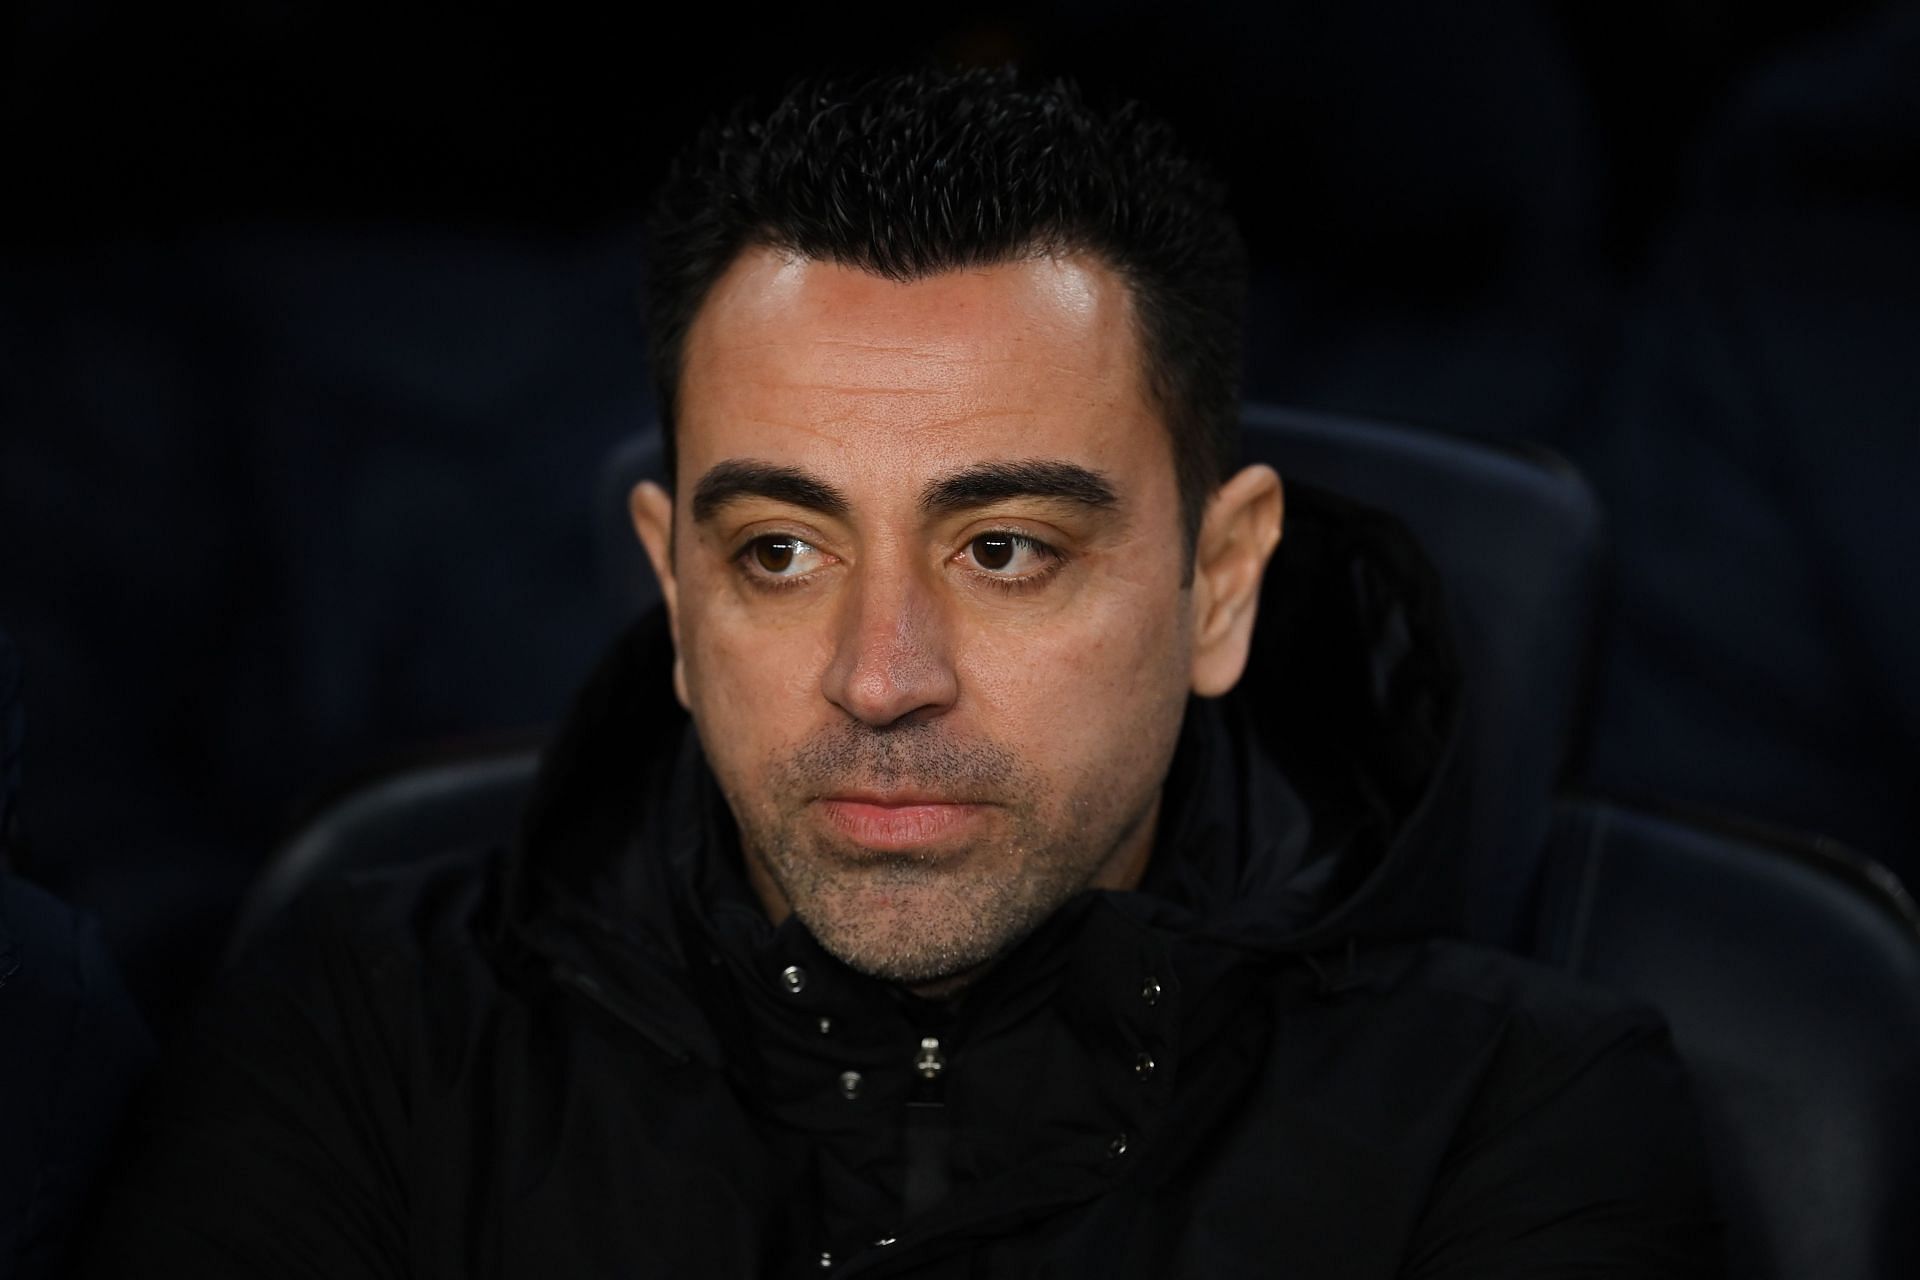 Xavi is taking charge of his club&#039;s transition